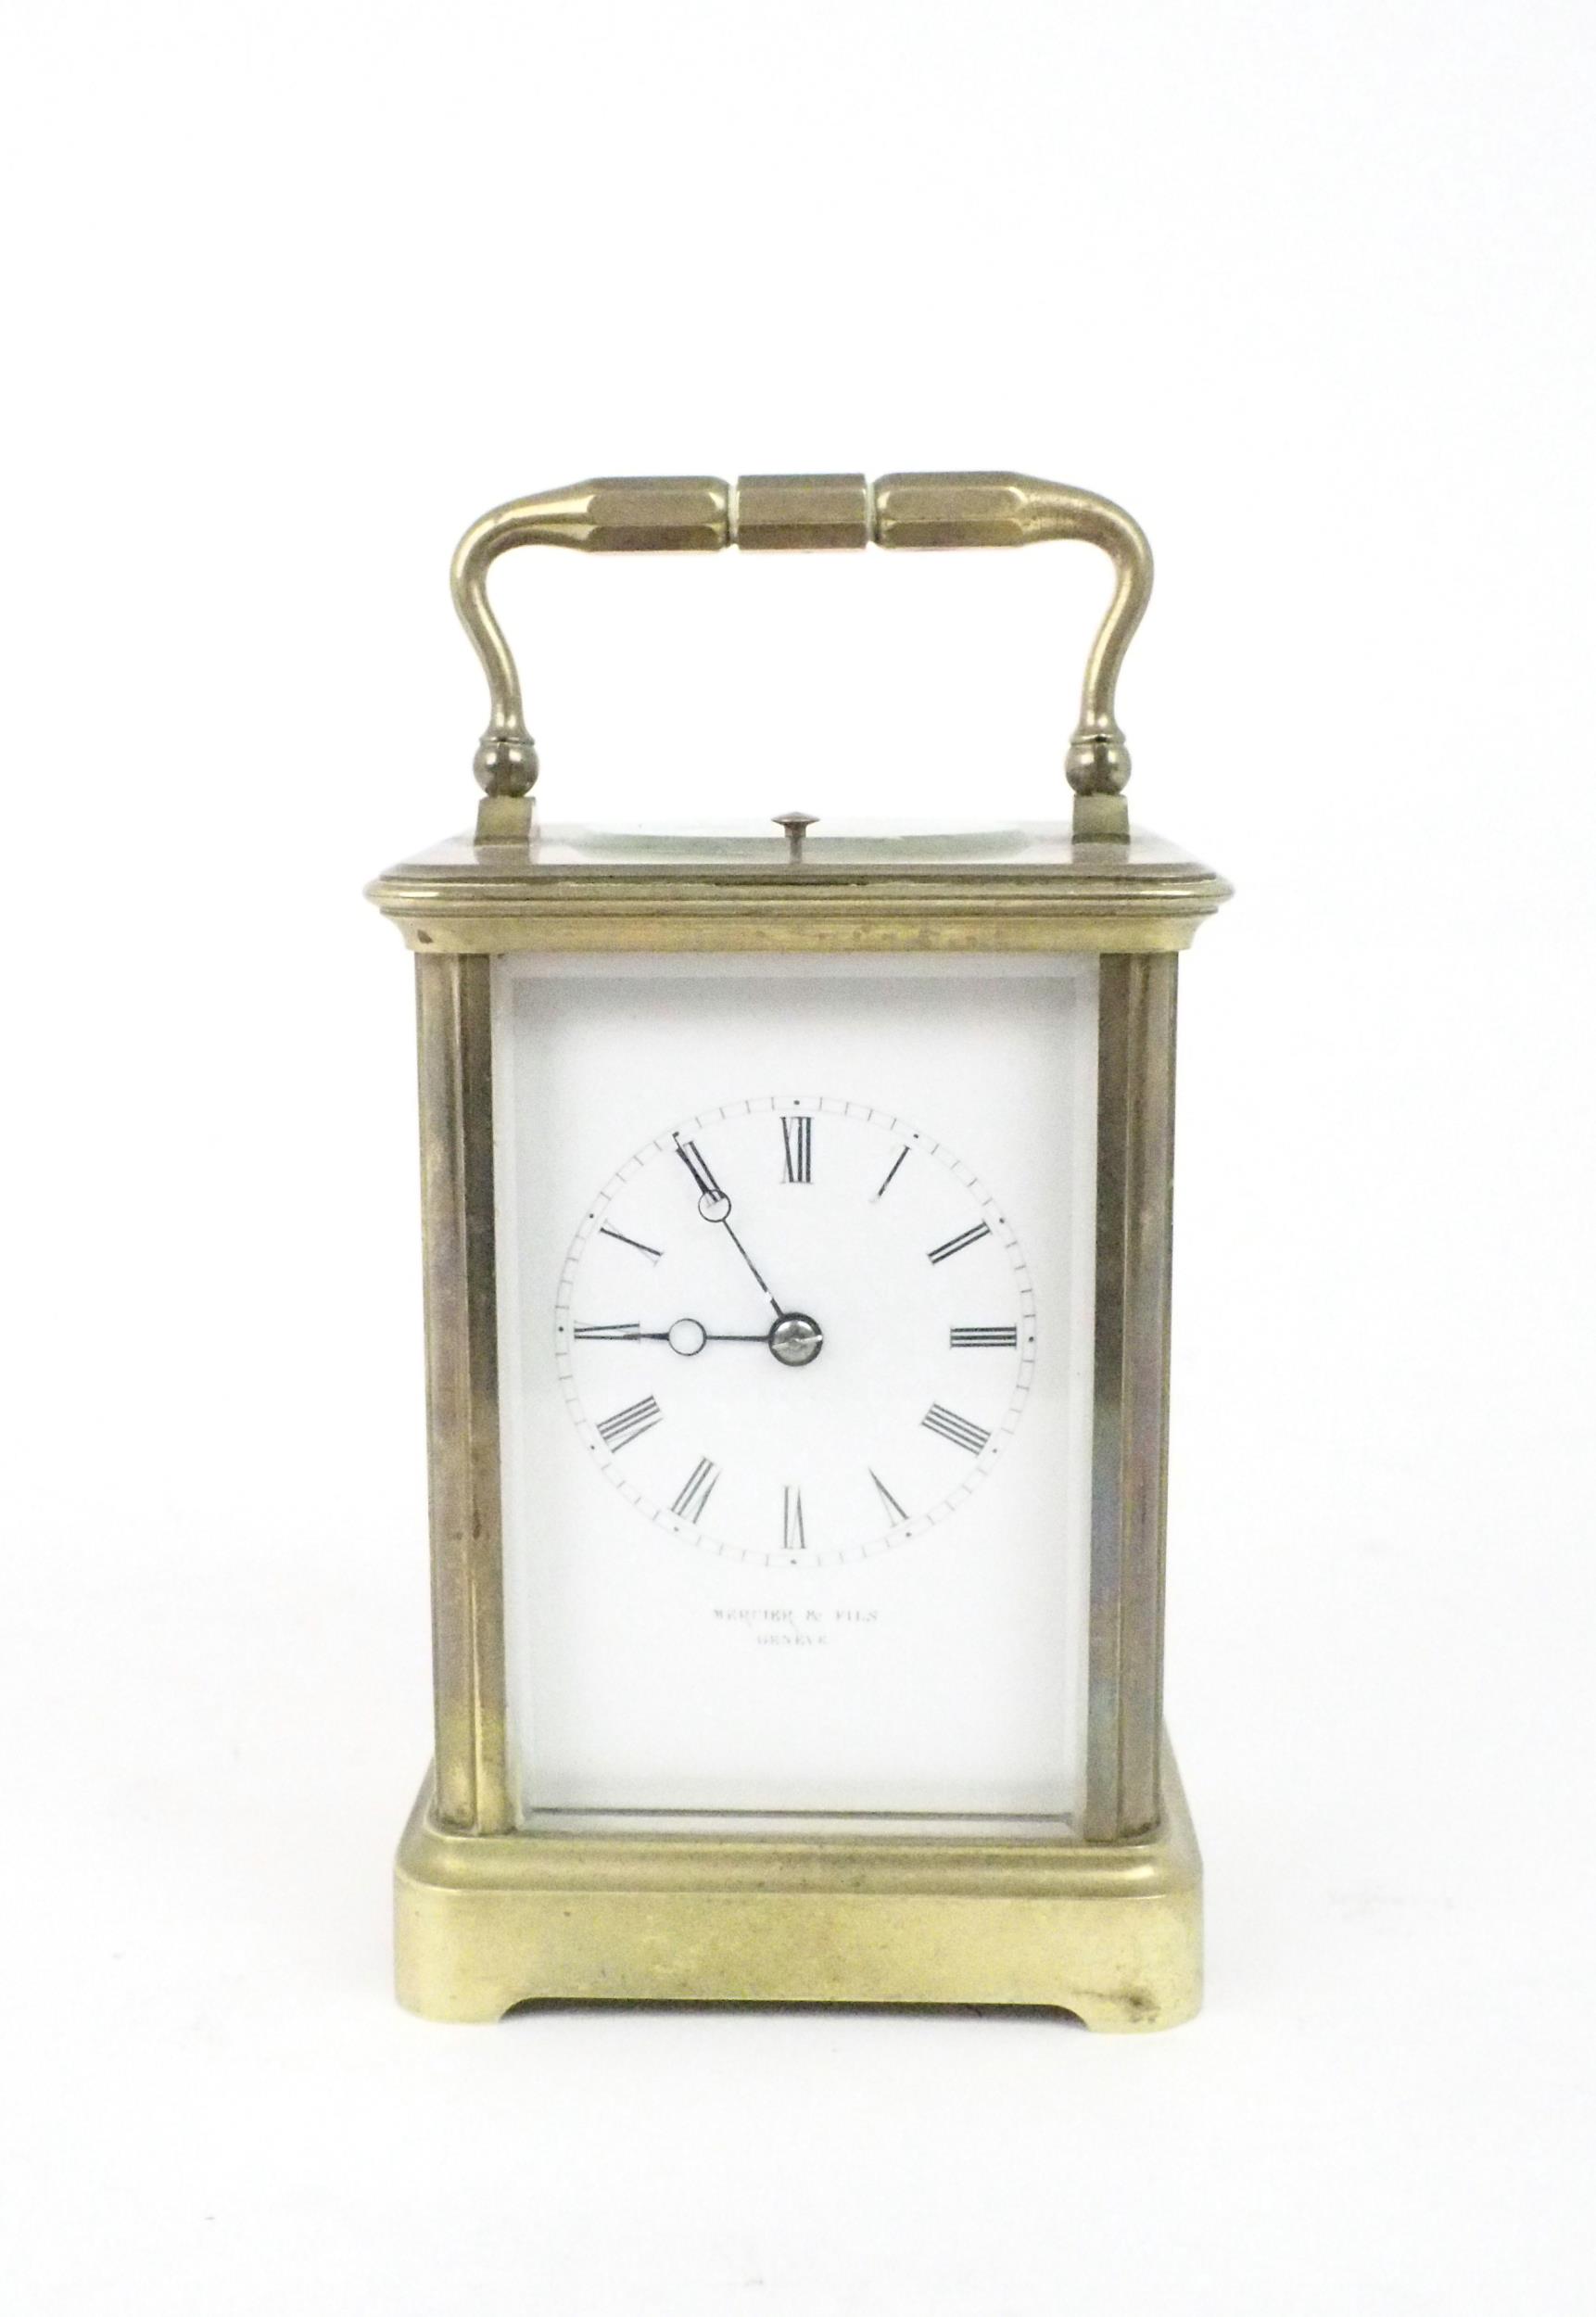 A MERCIER AND FILS GENEVE BRASS REPEATING CARRIAGE CLOCK the white dial with roman numerals, the